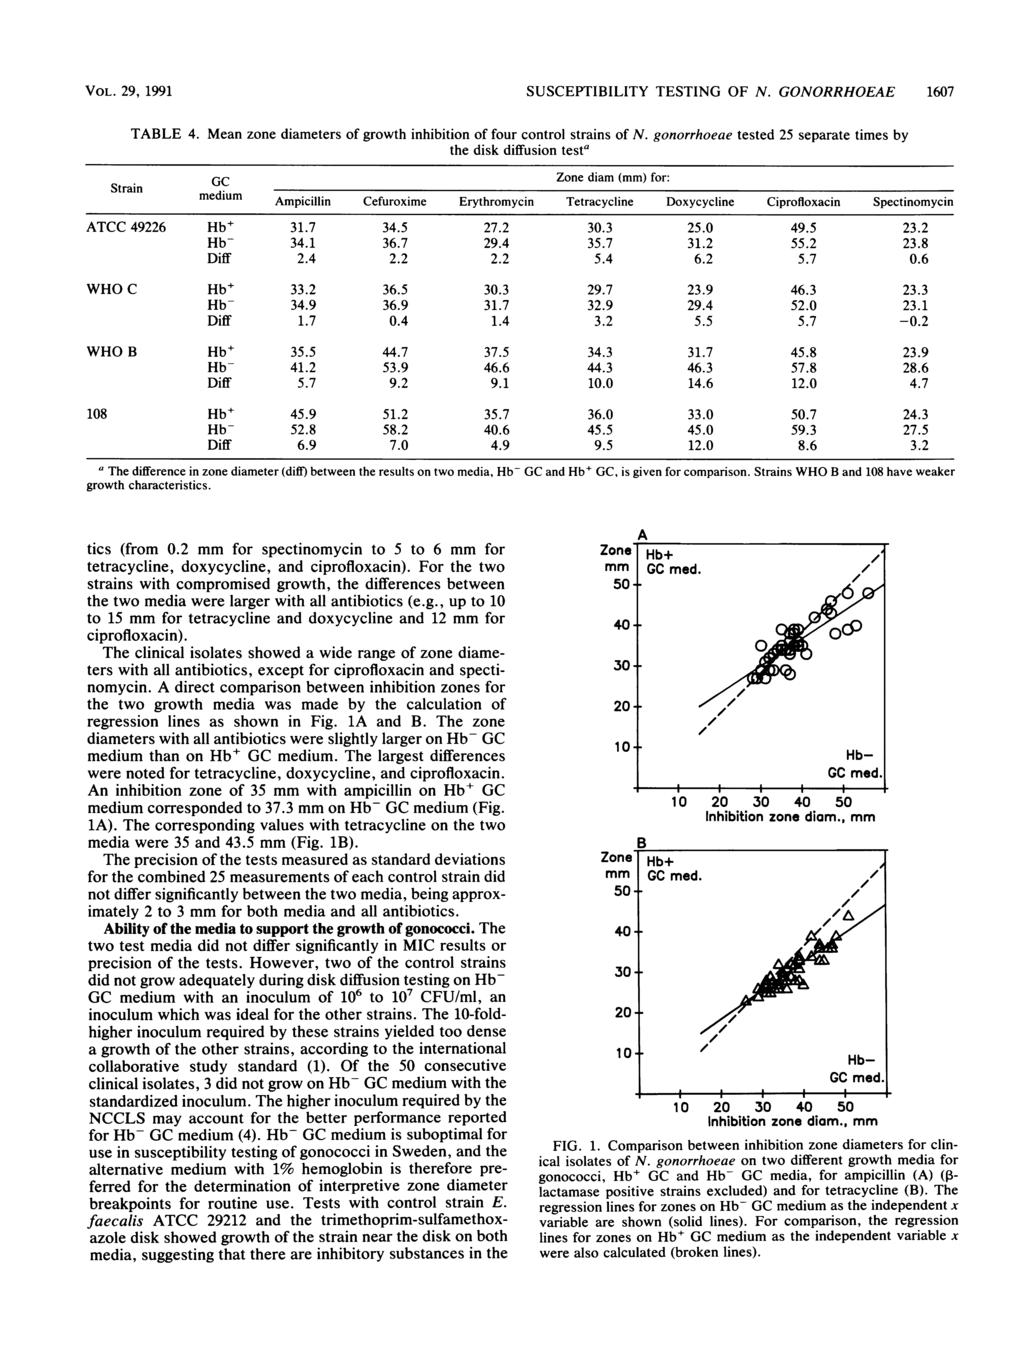 VOL. 29, 1991 SUSCEPTIBILITY TESTING OF N. GONORRHOEAE 1607 Strain TABLE 4. Stran Mean zone diameters of growth inhibition of four control strains of N.